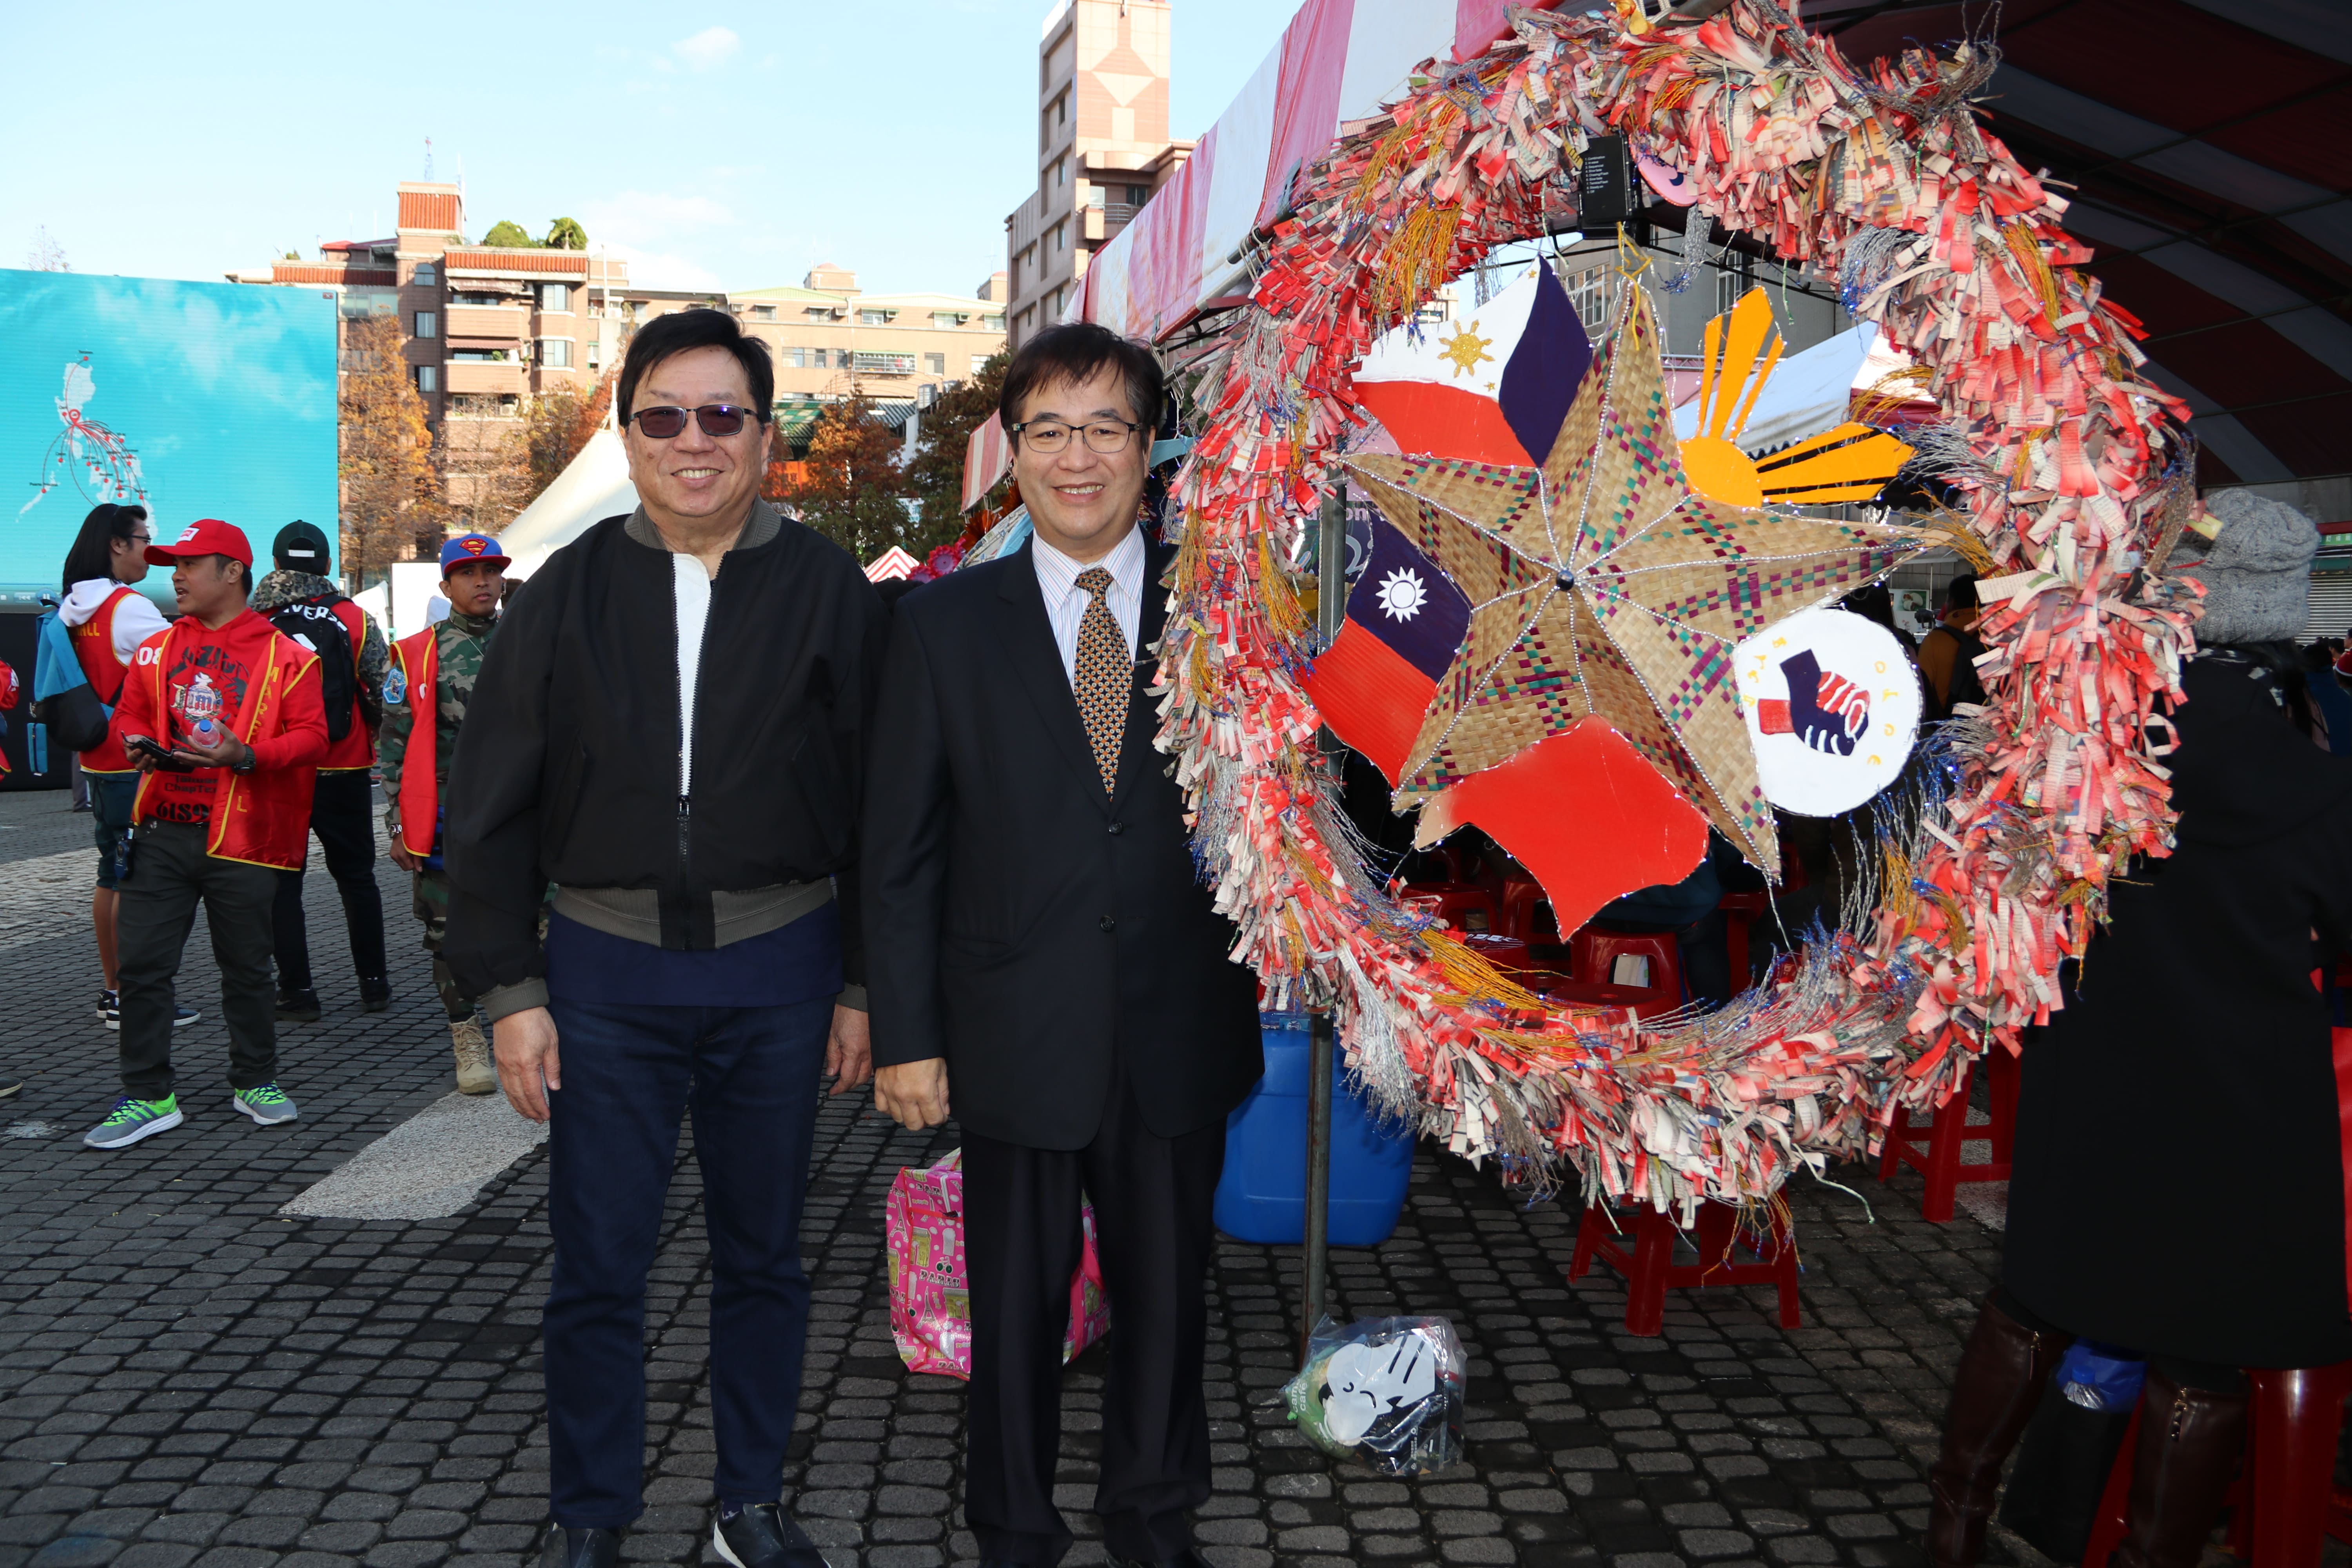 Deputy Mayor You of Taoyuan City Government and the representative of Manila Economic and Cultural Office, Banayo, appreciating the Christmas creative lighting decorations together. Photograph: Taoyuan City Government